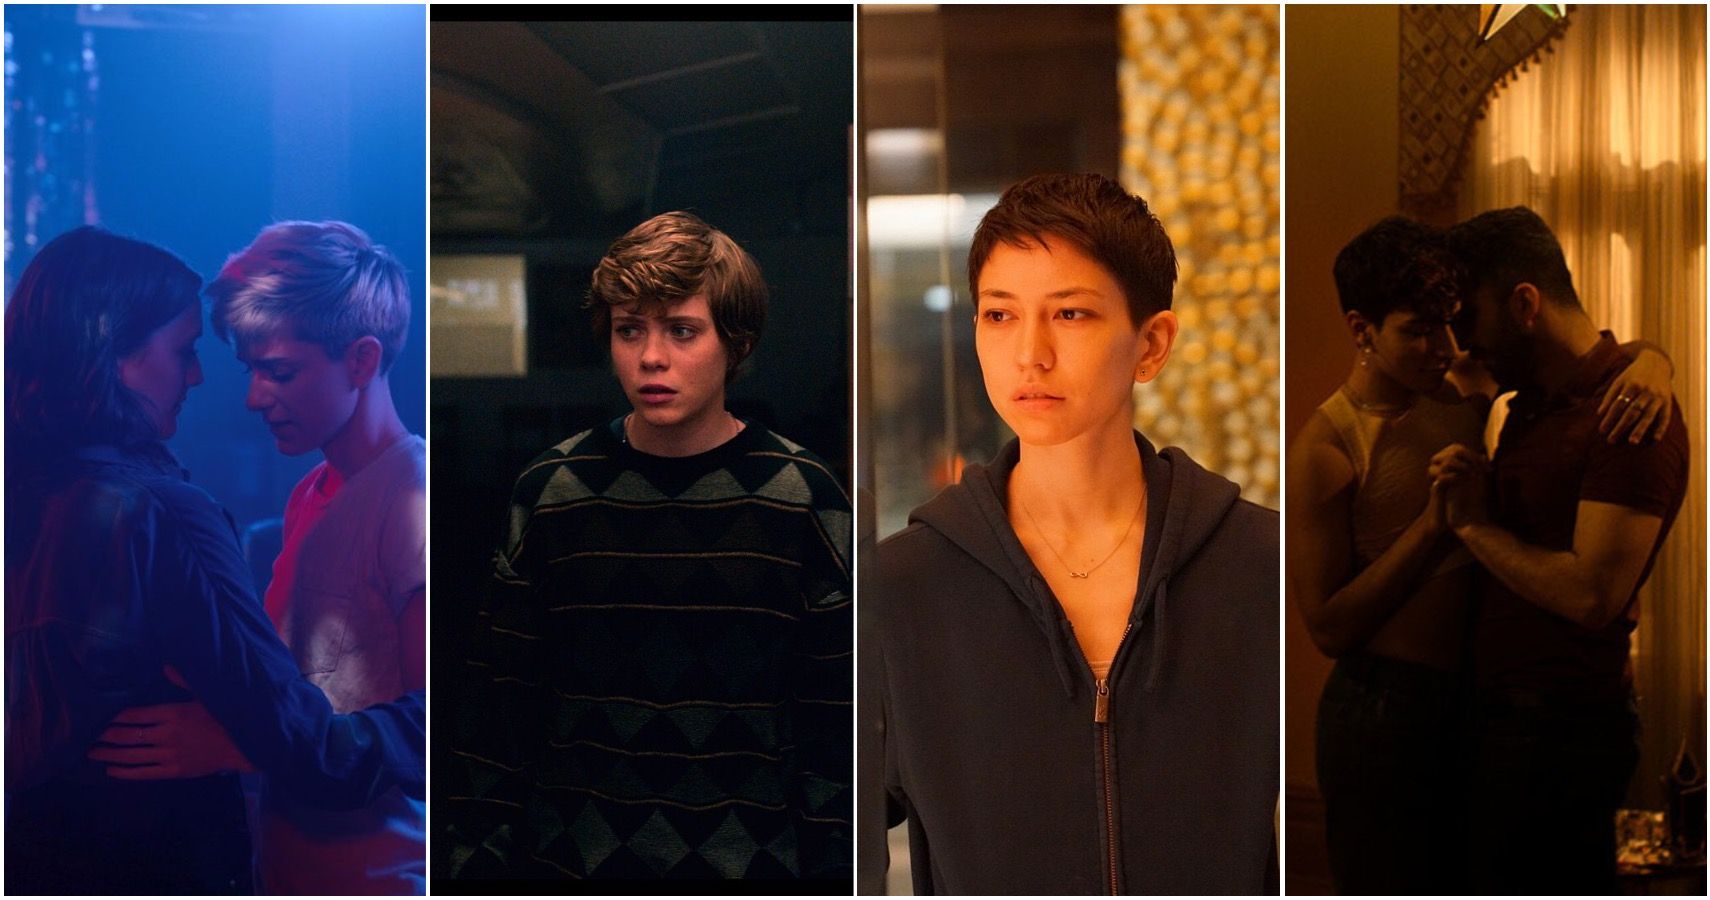 The Best New TV Series Of 2020 Ranked (According To Rotten Tomatoes)